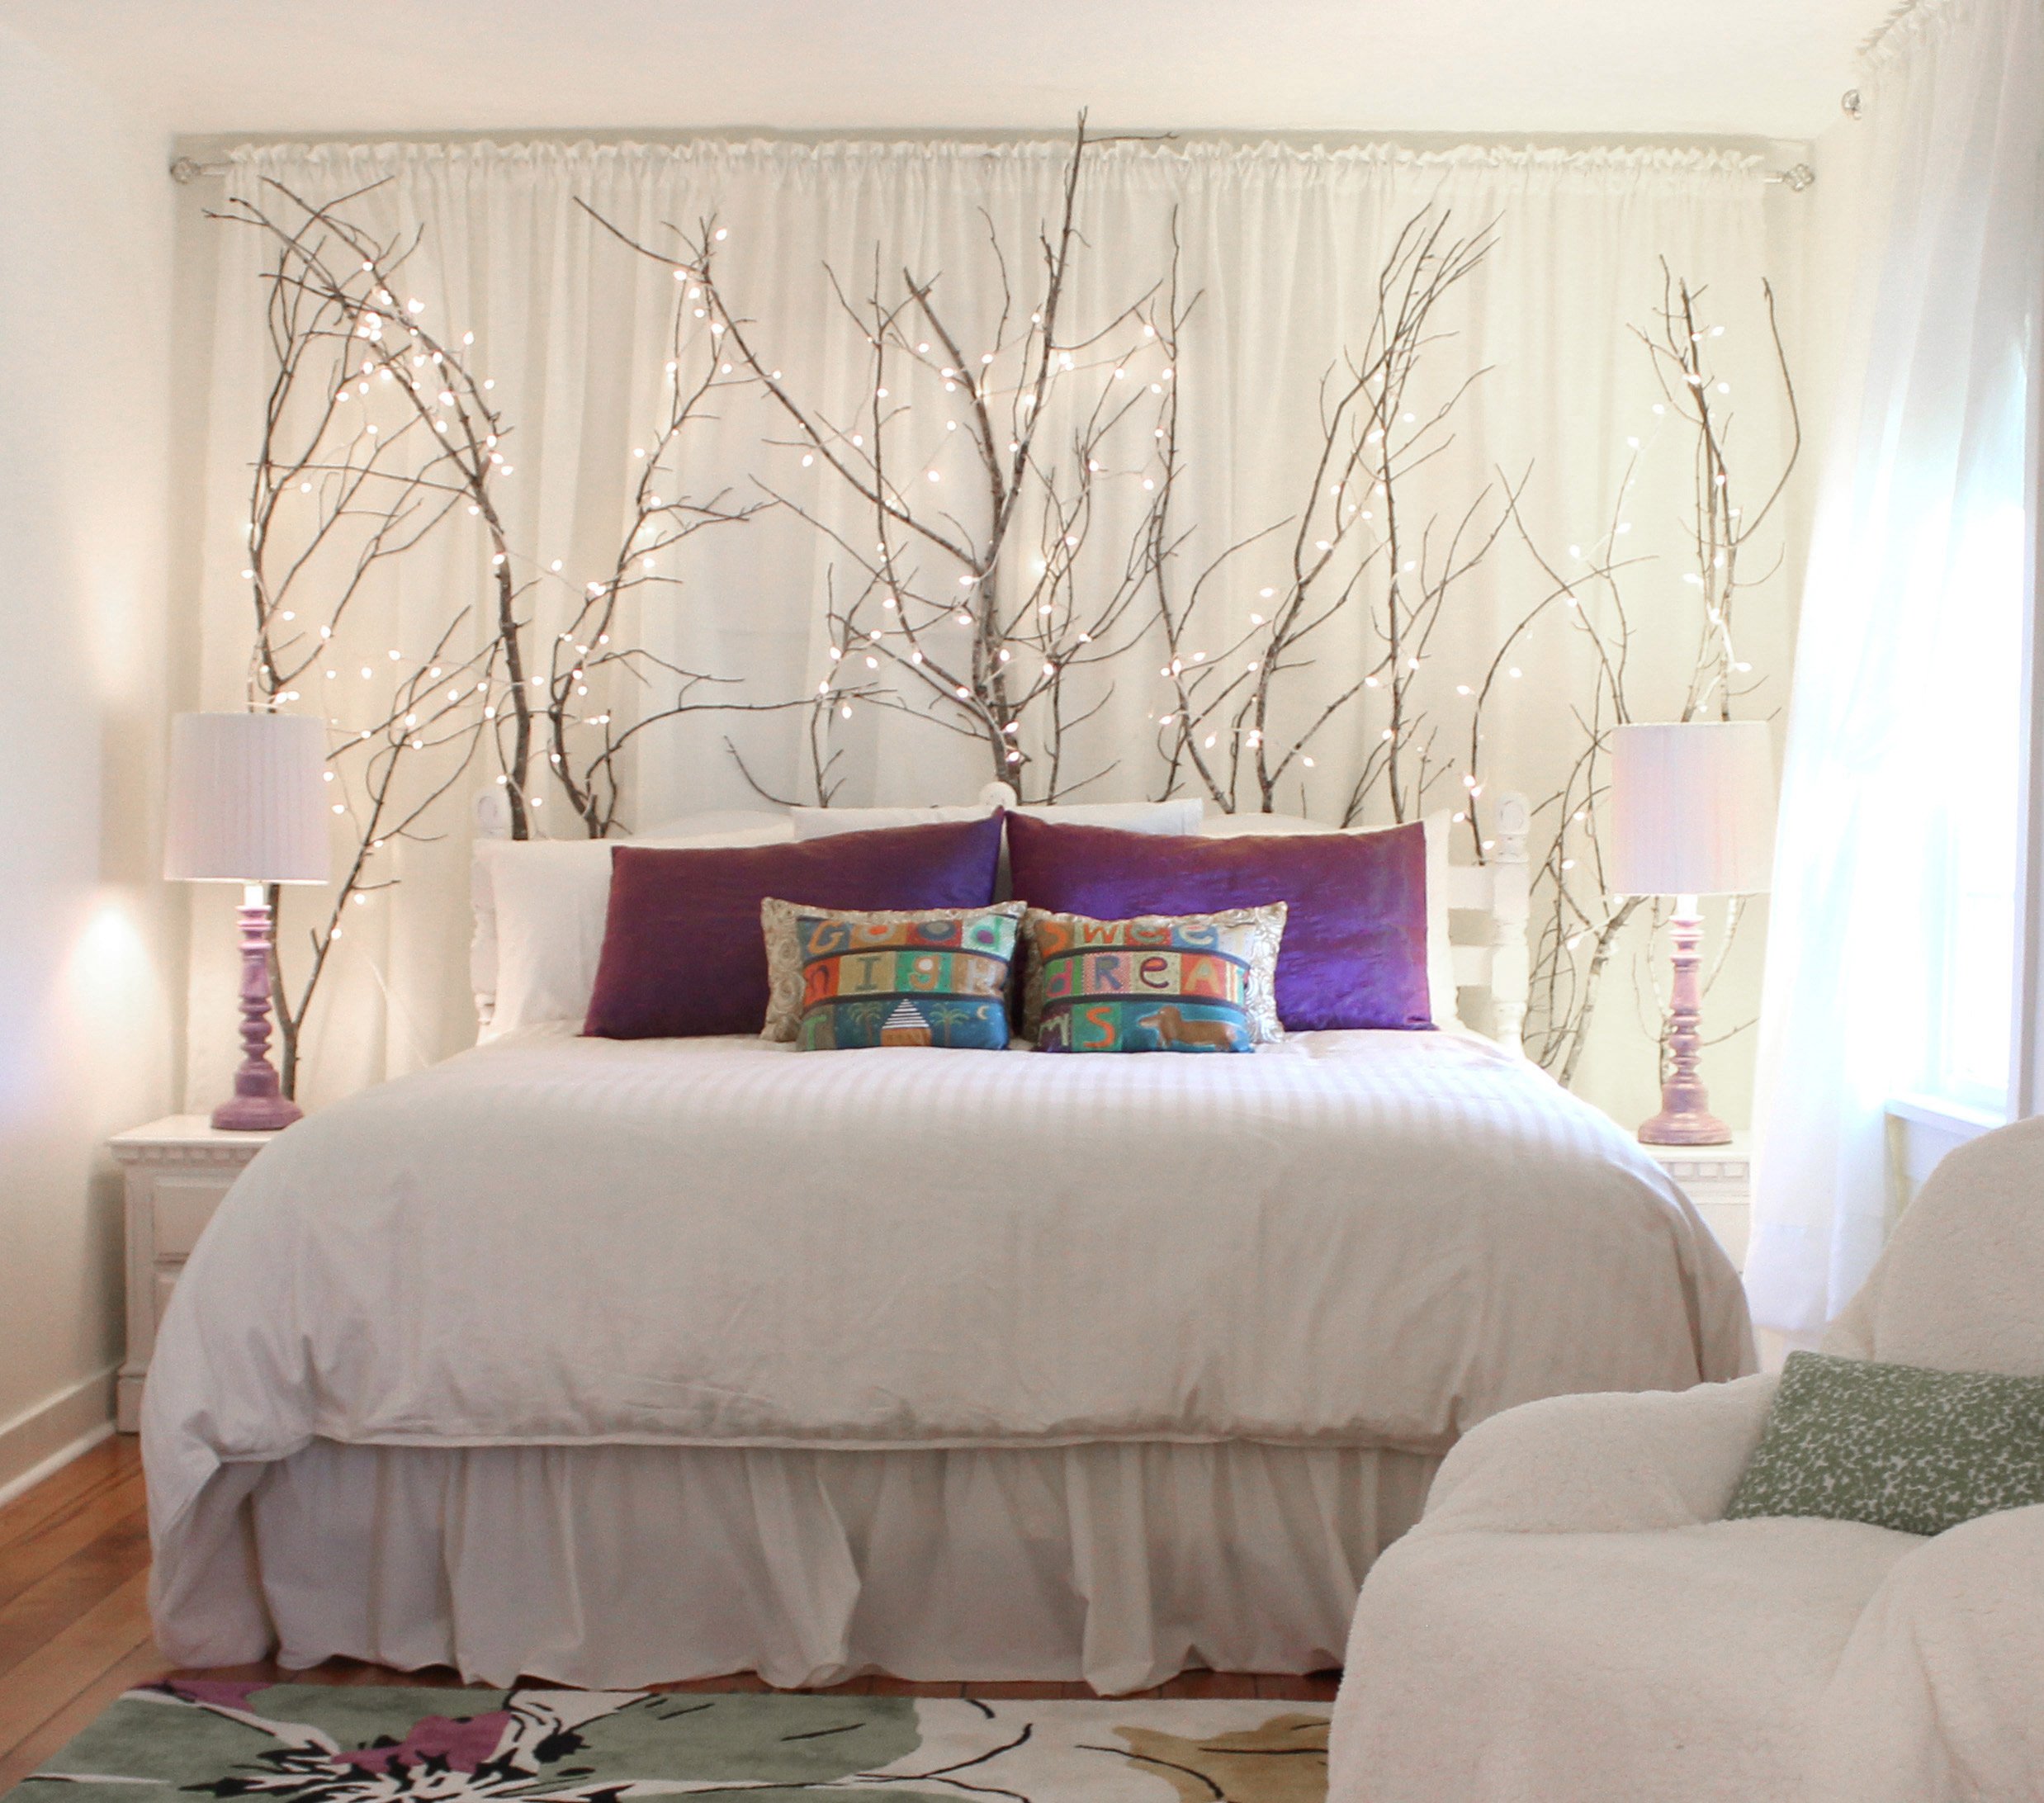 Creating Indoor Woodsy & Whimsy with Ceiling Branches · Hawk Hill